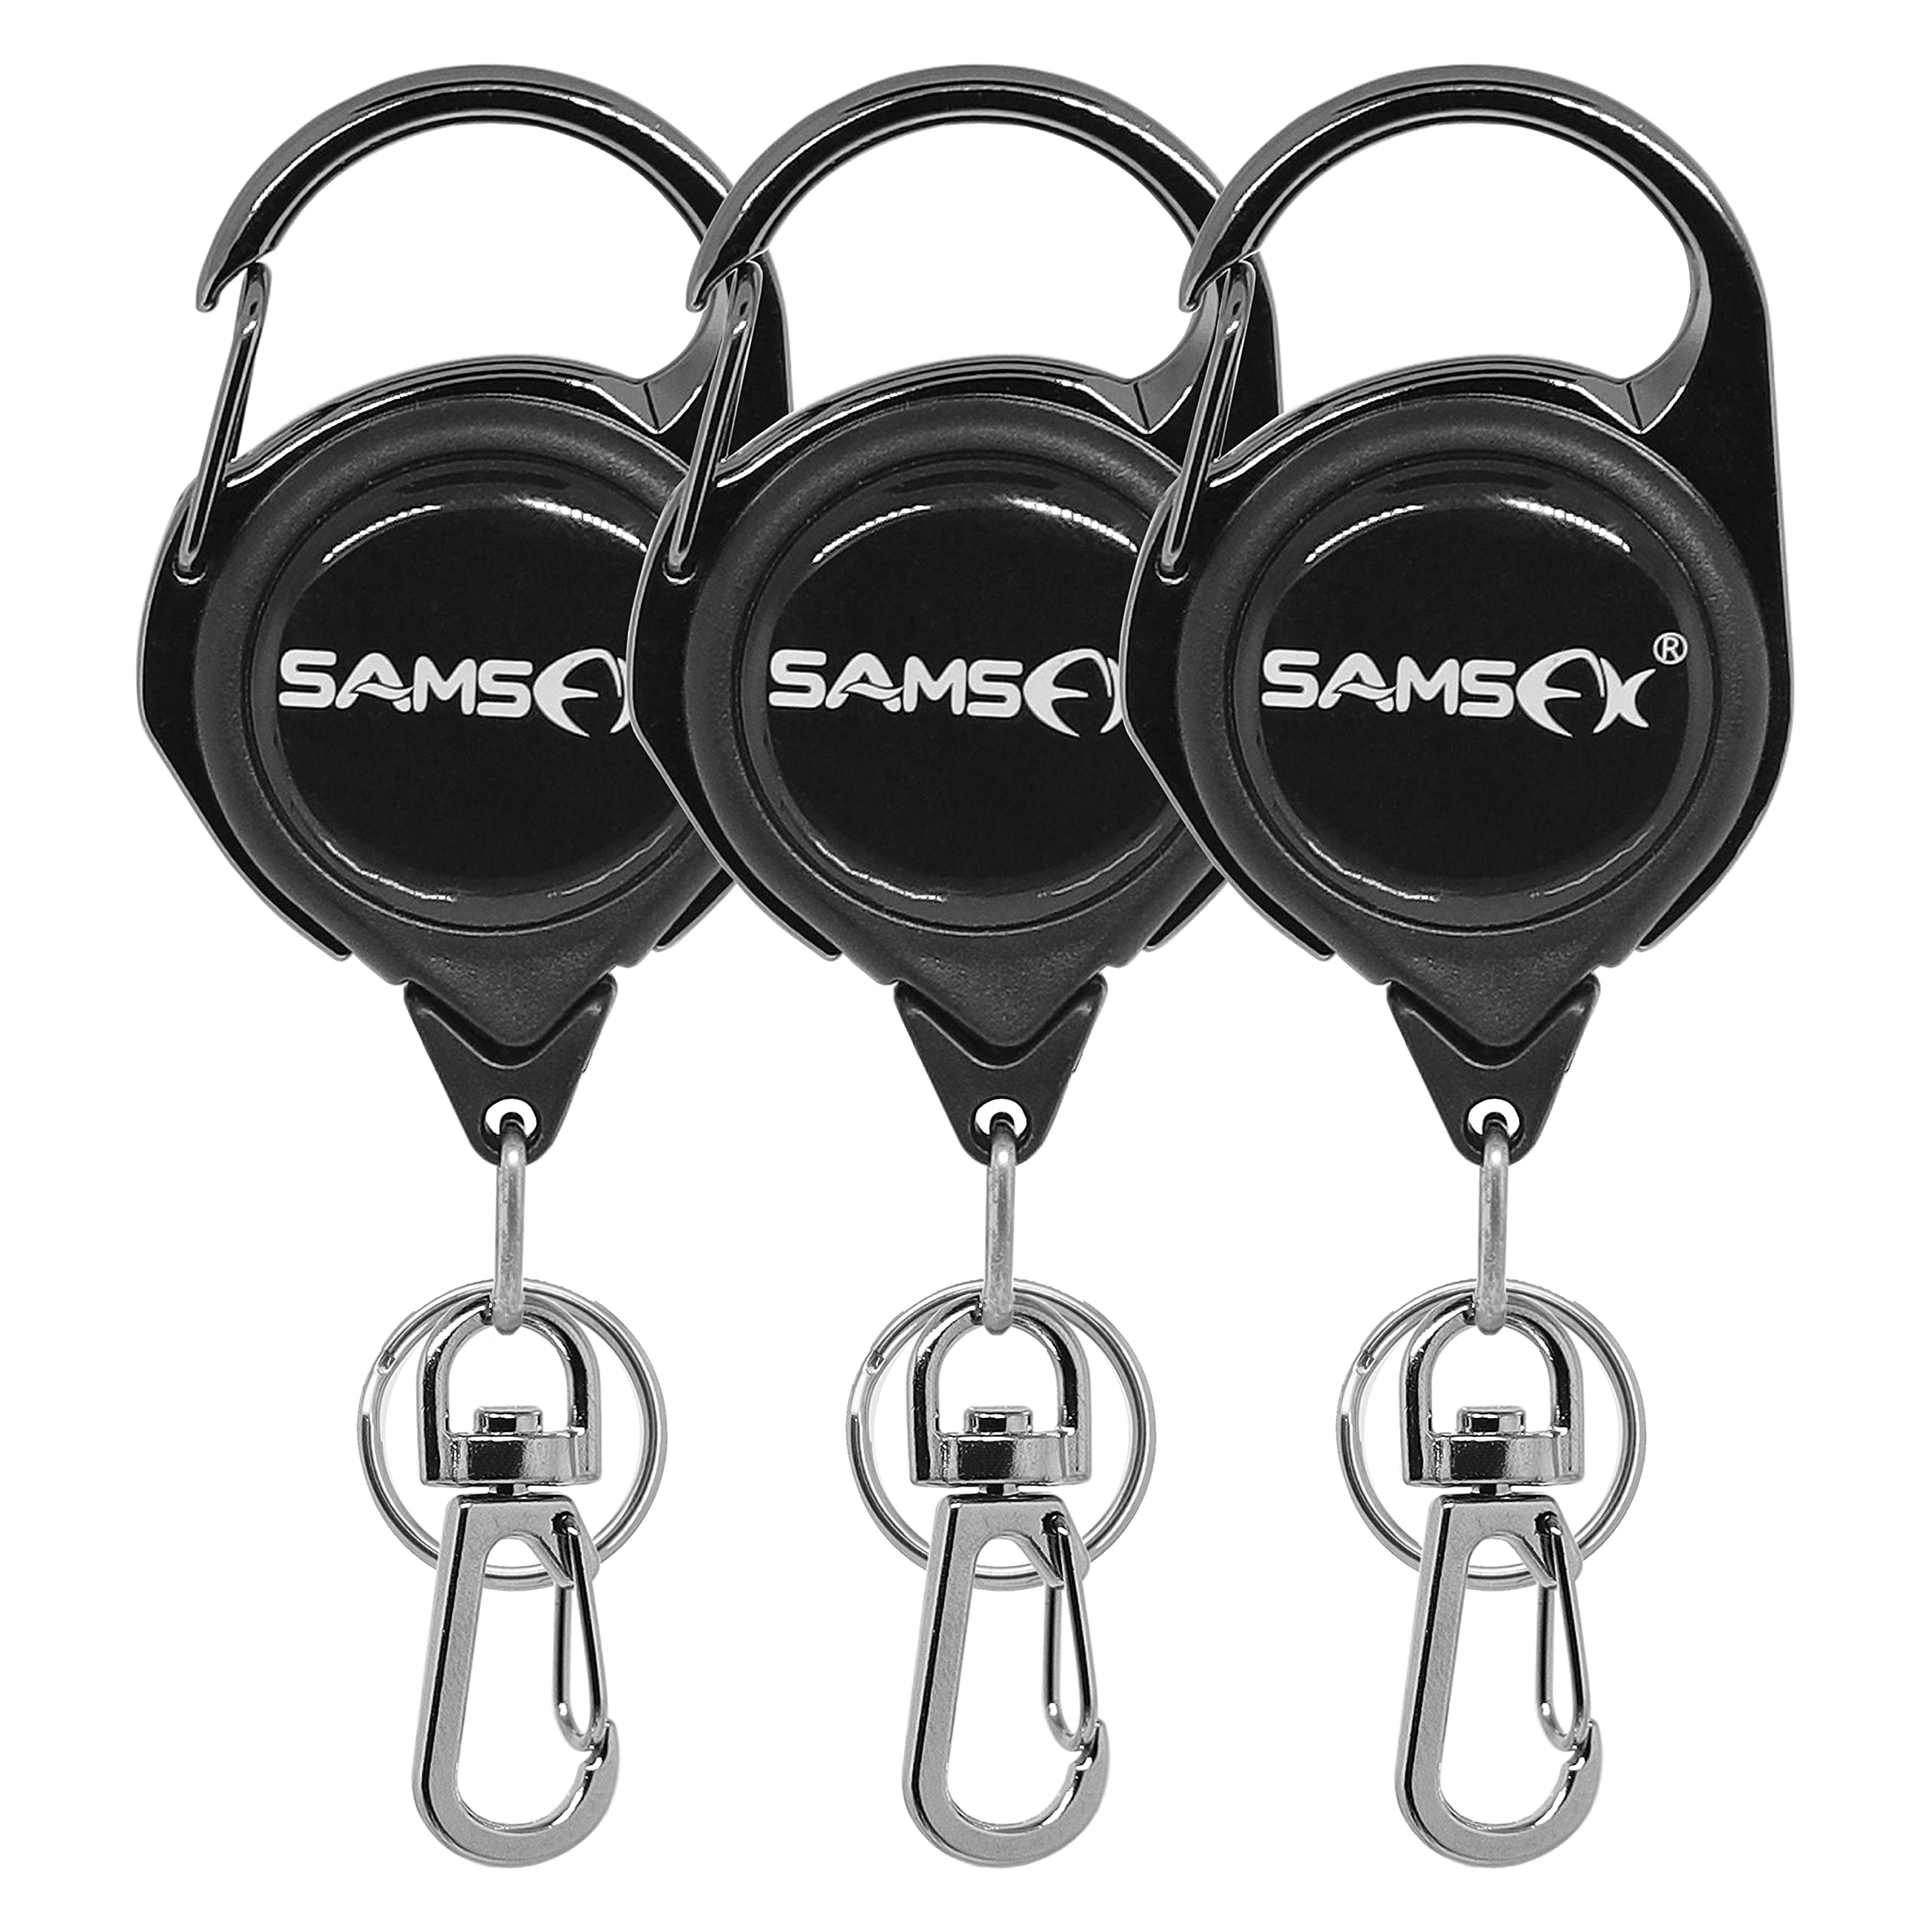 SAMSFX Fly Fishing Zinger Retractor for Anglers Vest Pack Tool Gear  Assortment Combo 3pcs in Pack Carabiner Retractors, 24 Nylon Cord,  Rotating Clip